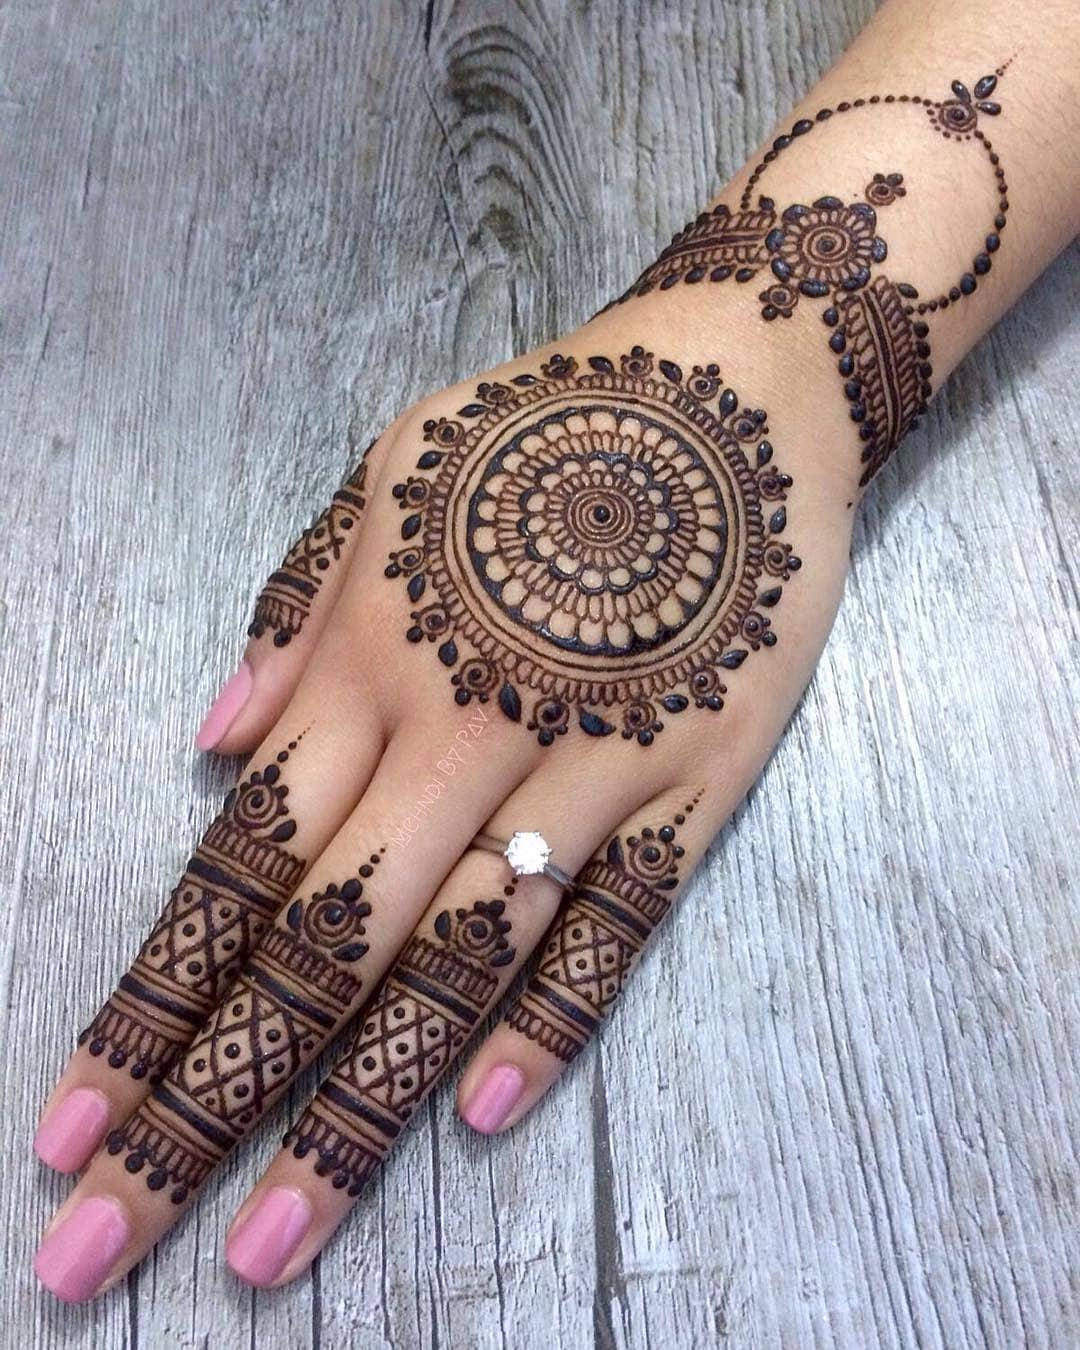 Back Hand Mehndi Designs Images • anchal (@578756895) on ShareChat